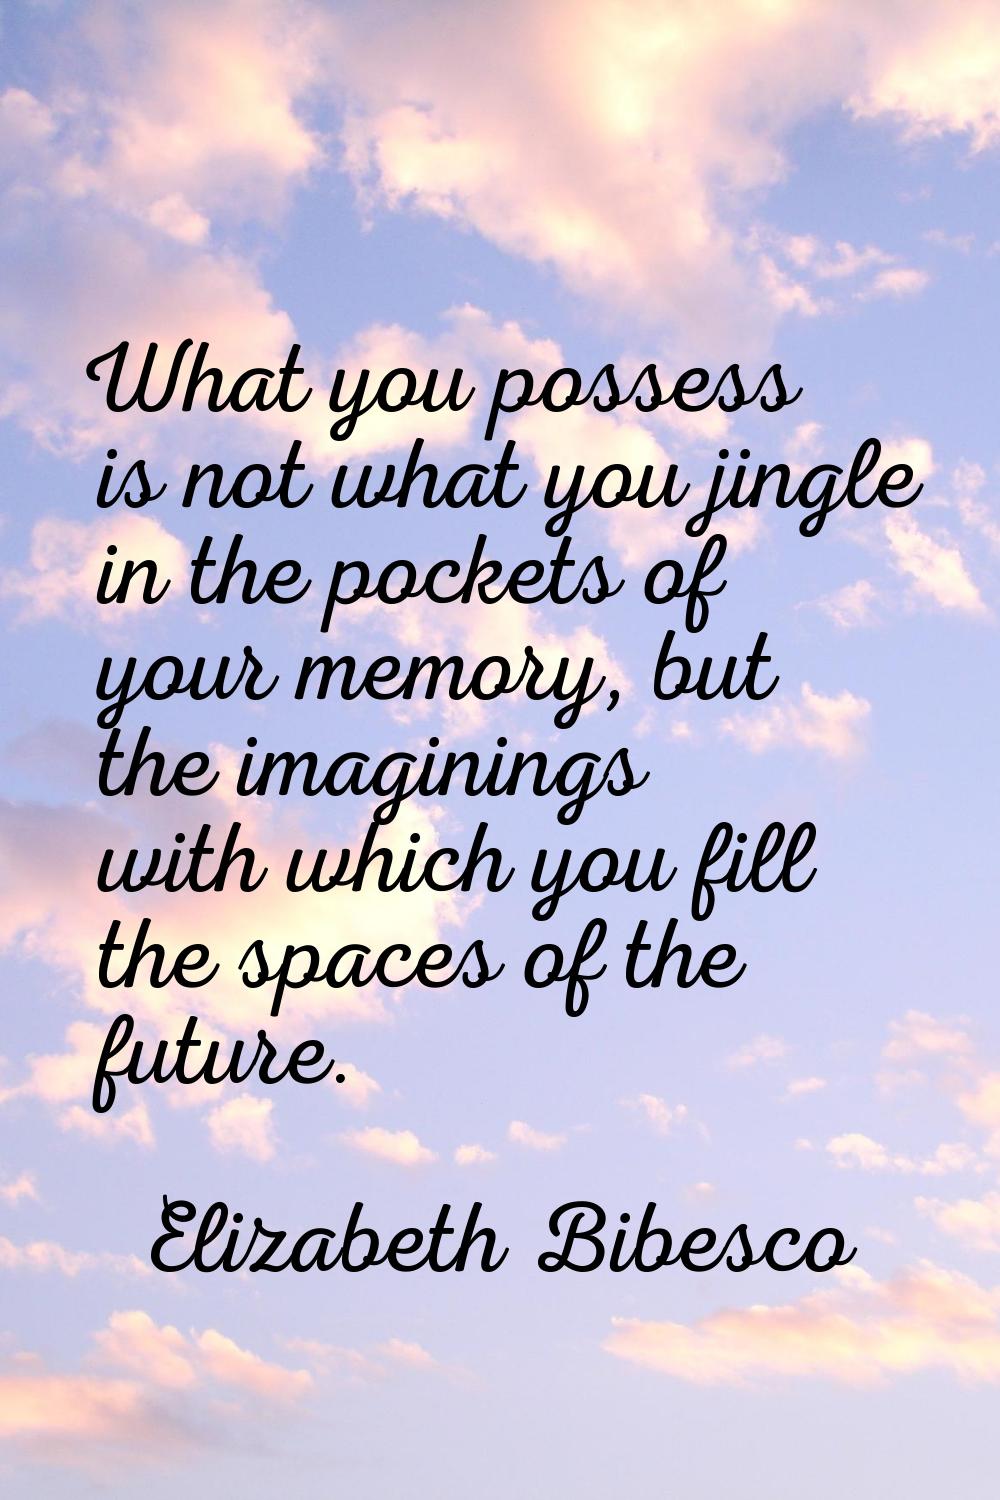 What you possess is not what you jingle in the pockets of your memory, but the imaginings with whic